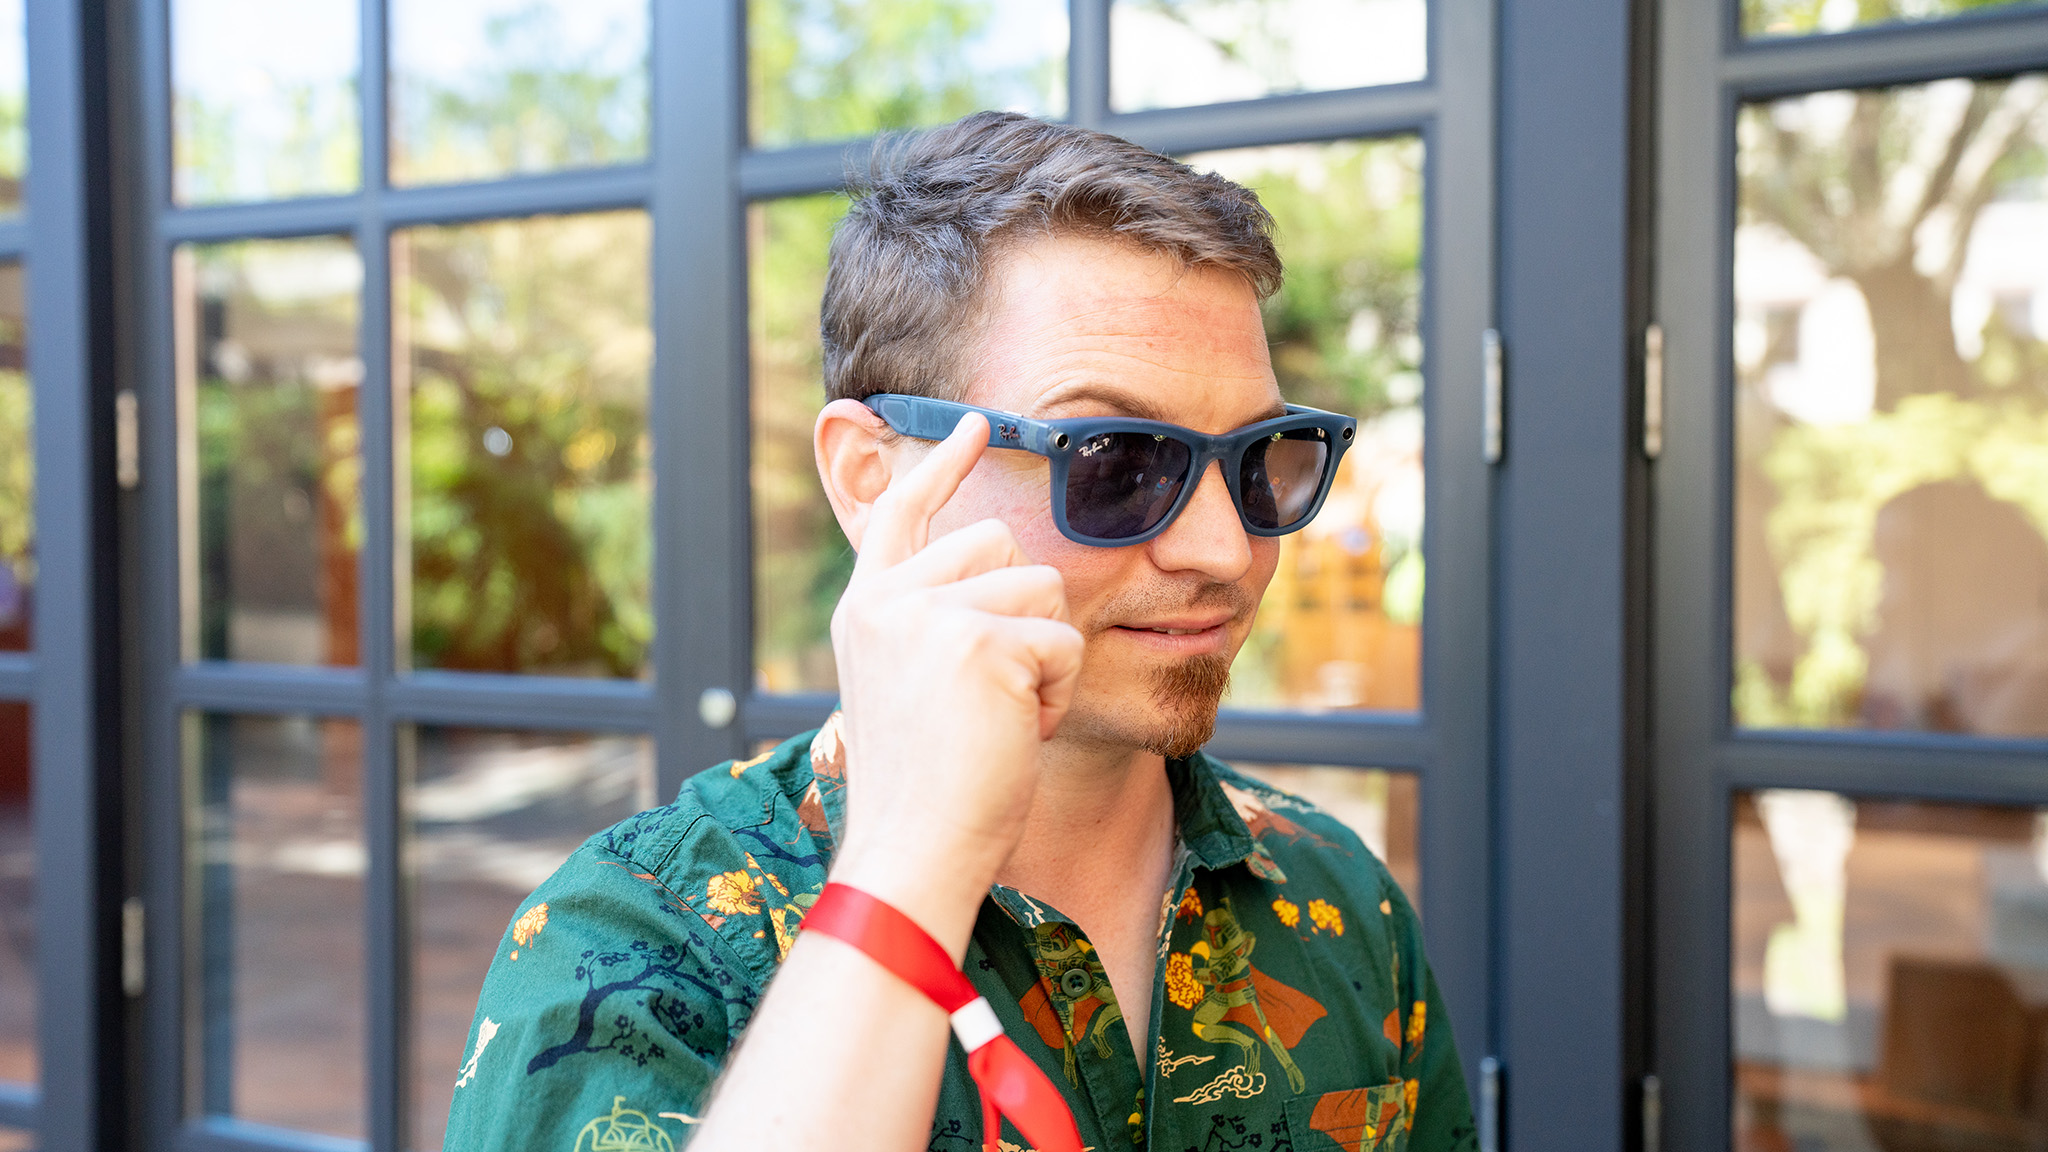 Ray-Ban Meta Smart Glasses: Analyze Your Surroundings with New AI Features